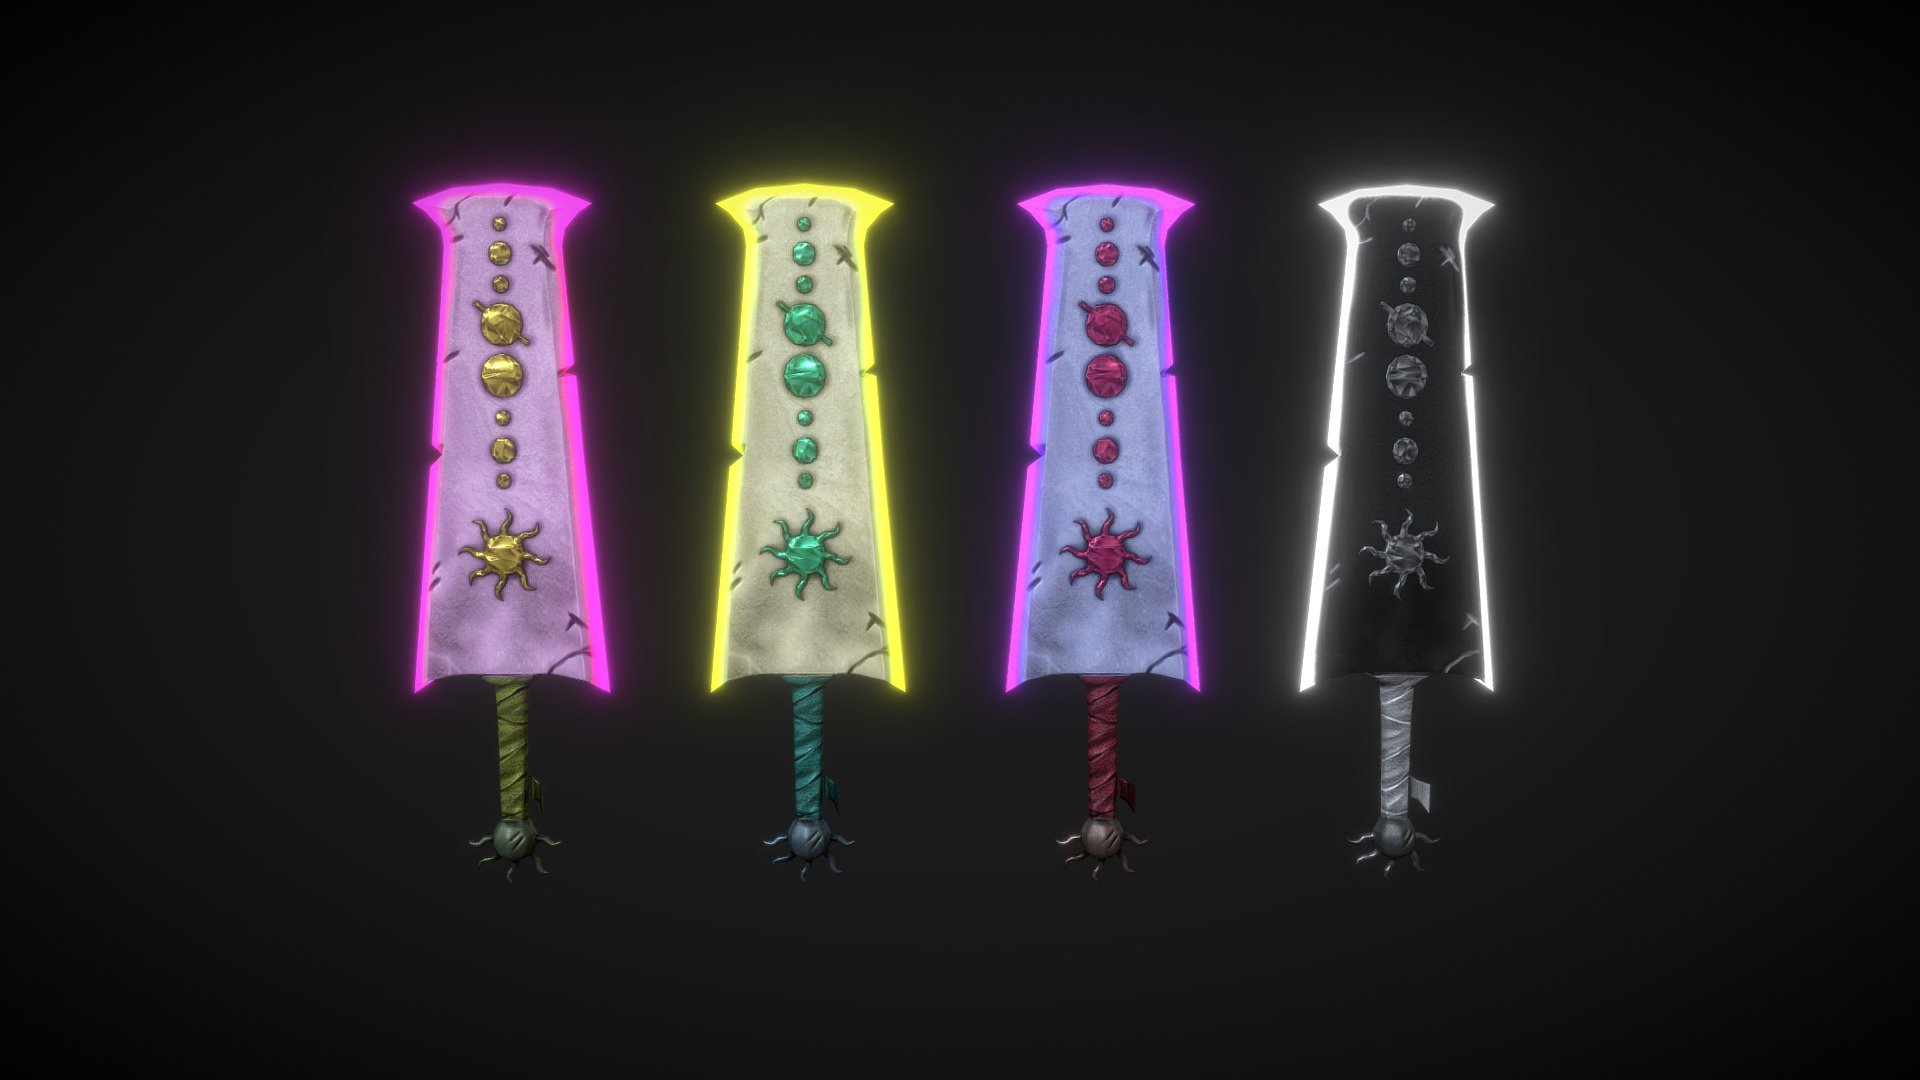 4 versions of a fantasy sword for you to use in your project.
Format: FBX

includes a zip with:
* FBX of all swords
* single sword FBX
* textures of all versions - Astral Sword assets - Download Free 3D model by Hobu (@Hobu_Coffee) 3d model